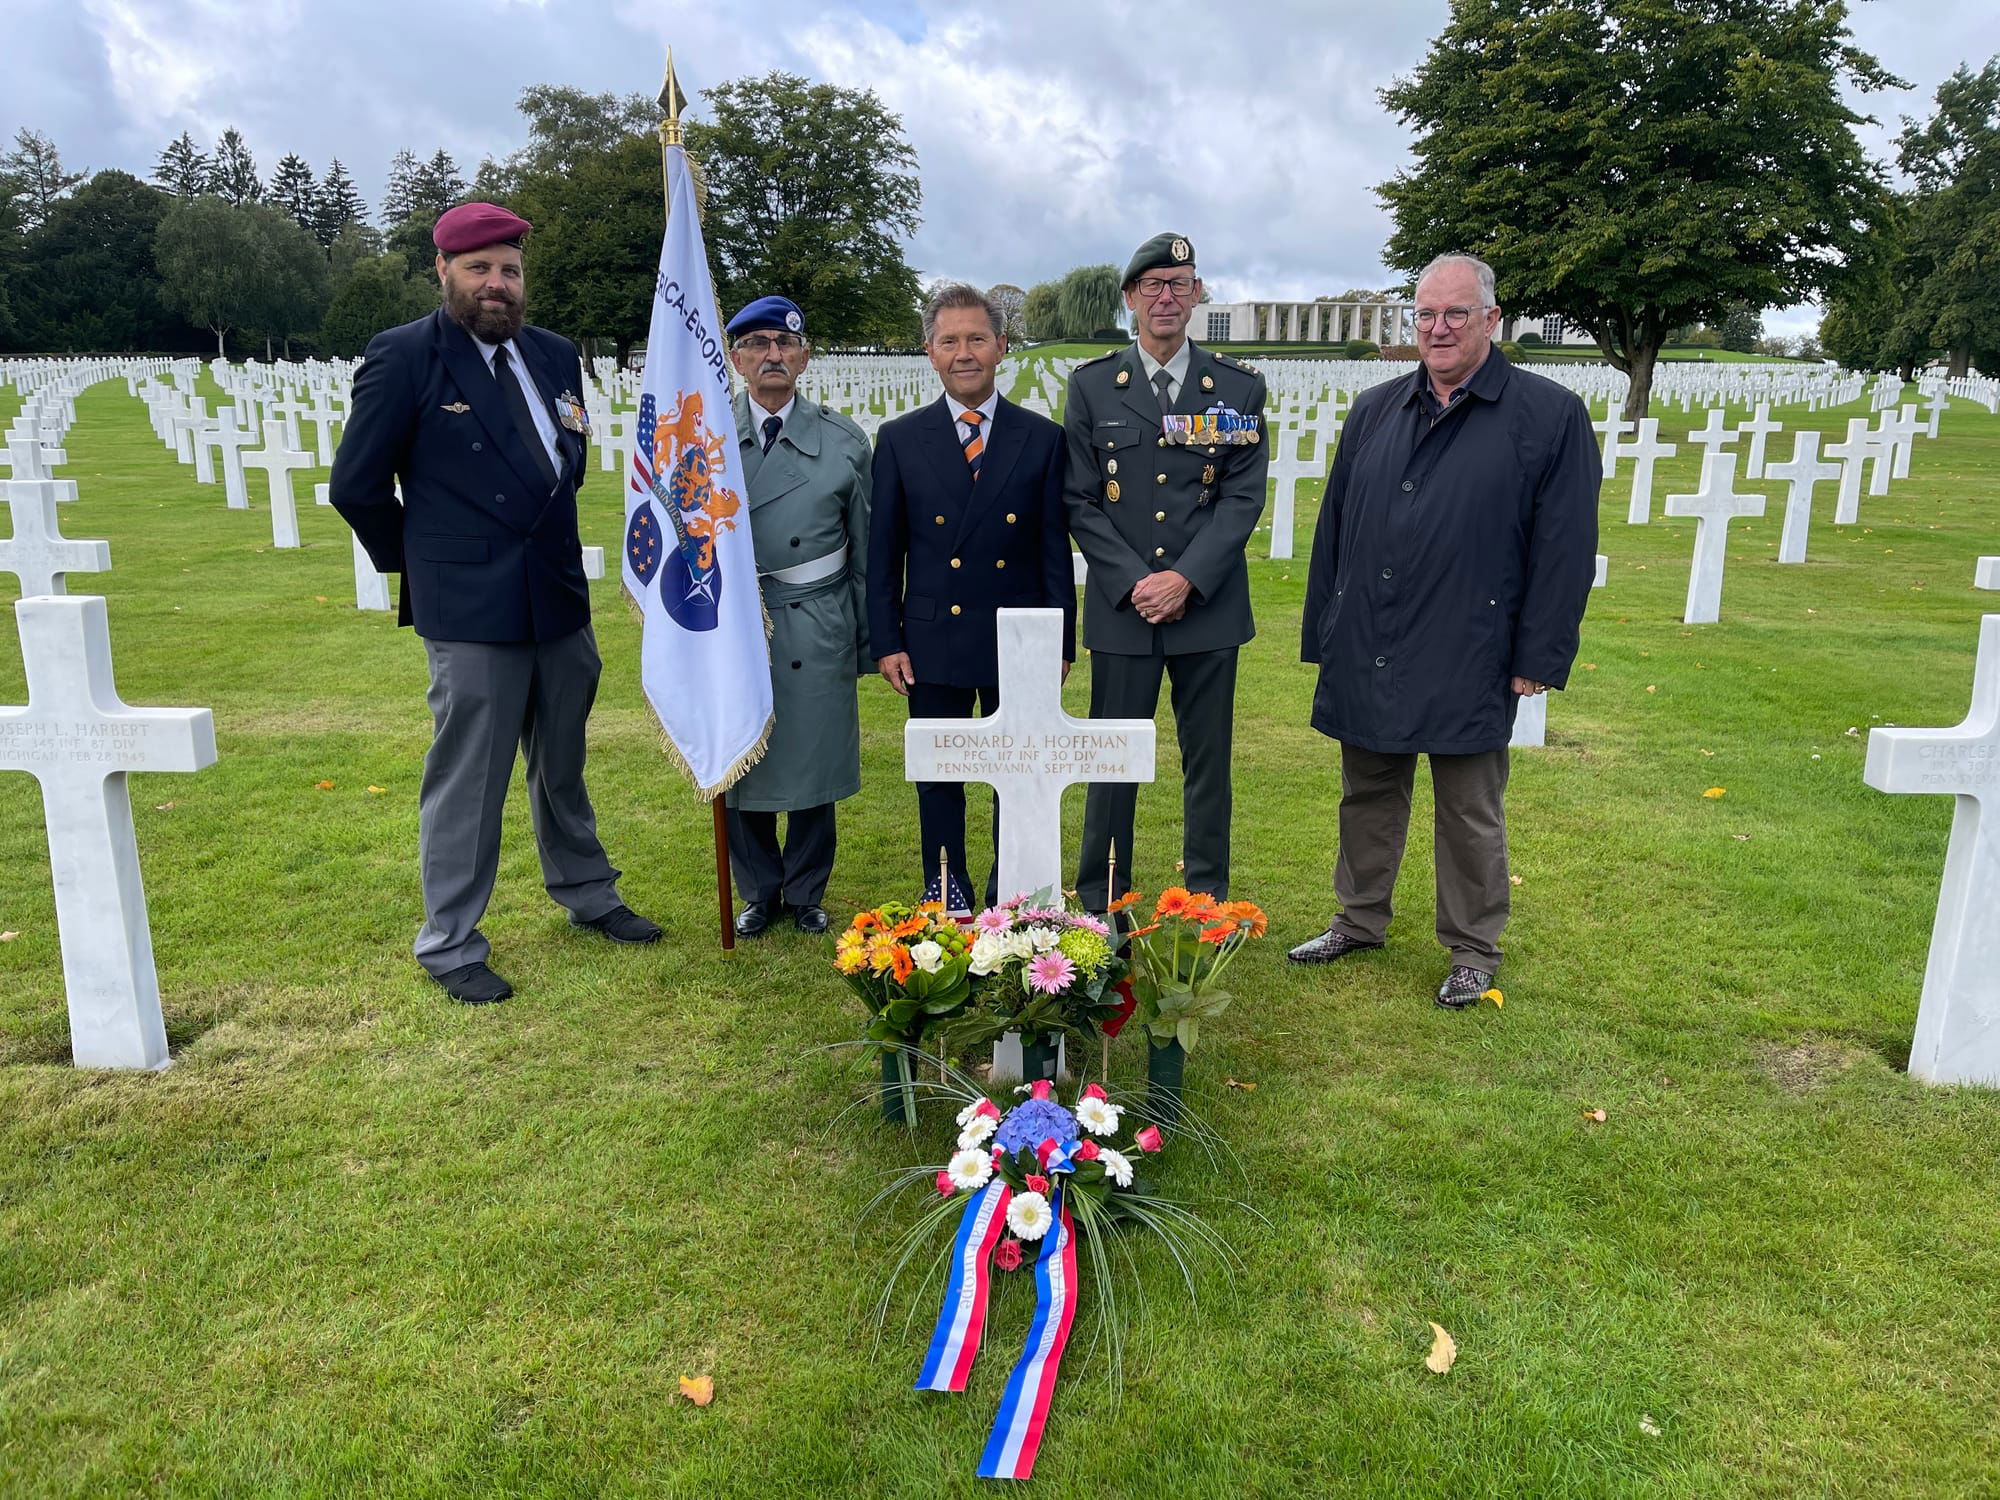 September 17th, 2022, Joint Commemoration Ceremony with “ Wapenbroeders Ospel” at US Cemetery Henri Chapelle. AEFA wreathlaying at grave of PFC Leonard Hoffmann, first American KIA while liberating Mesch.